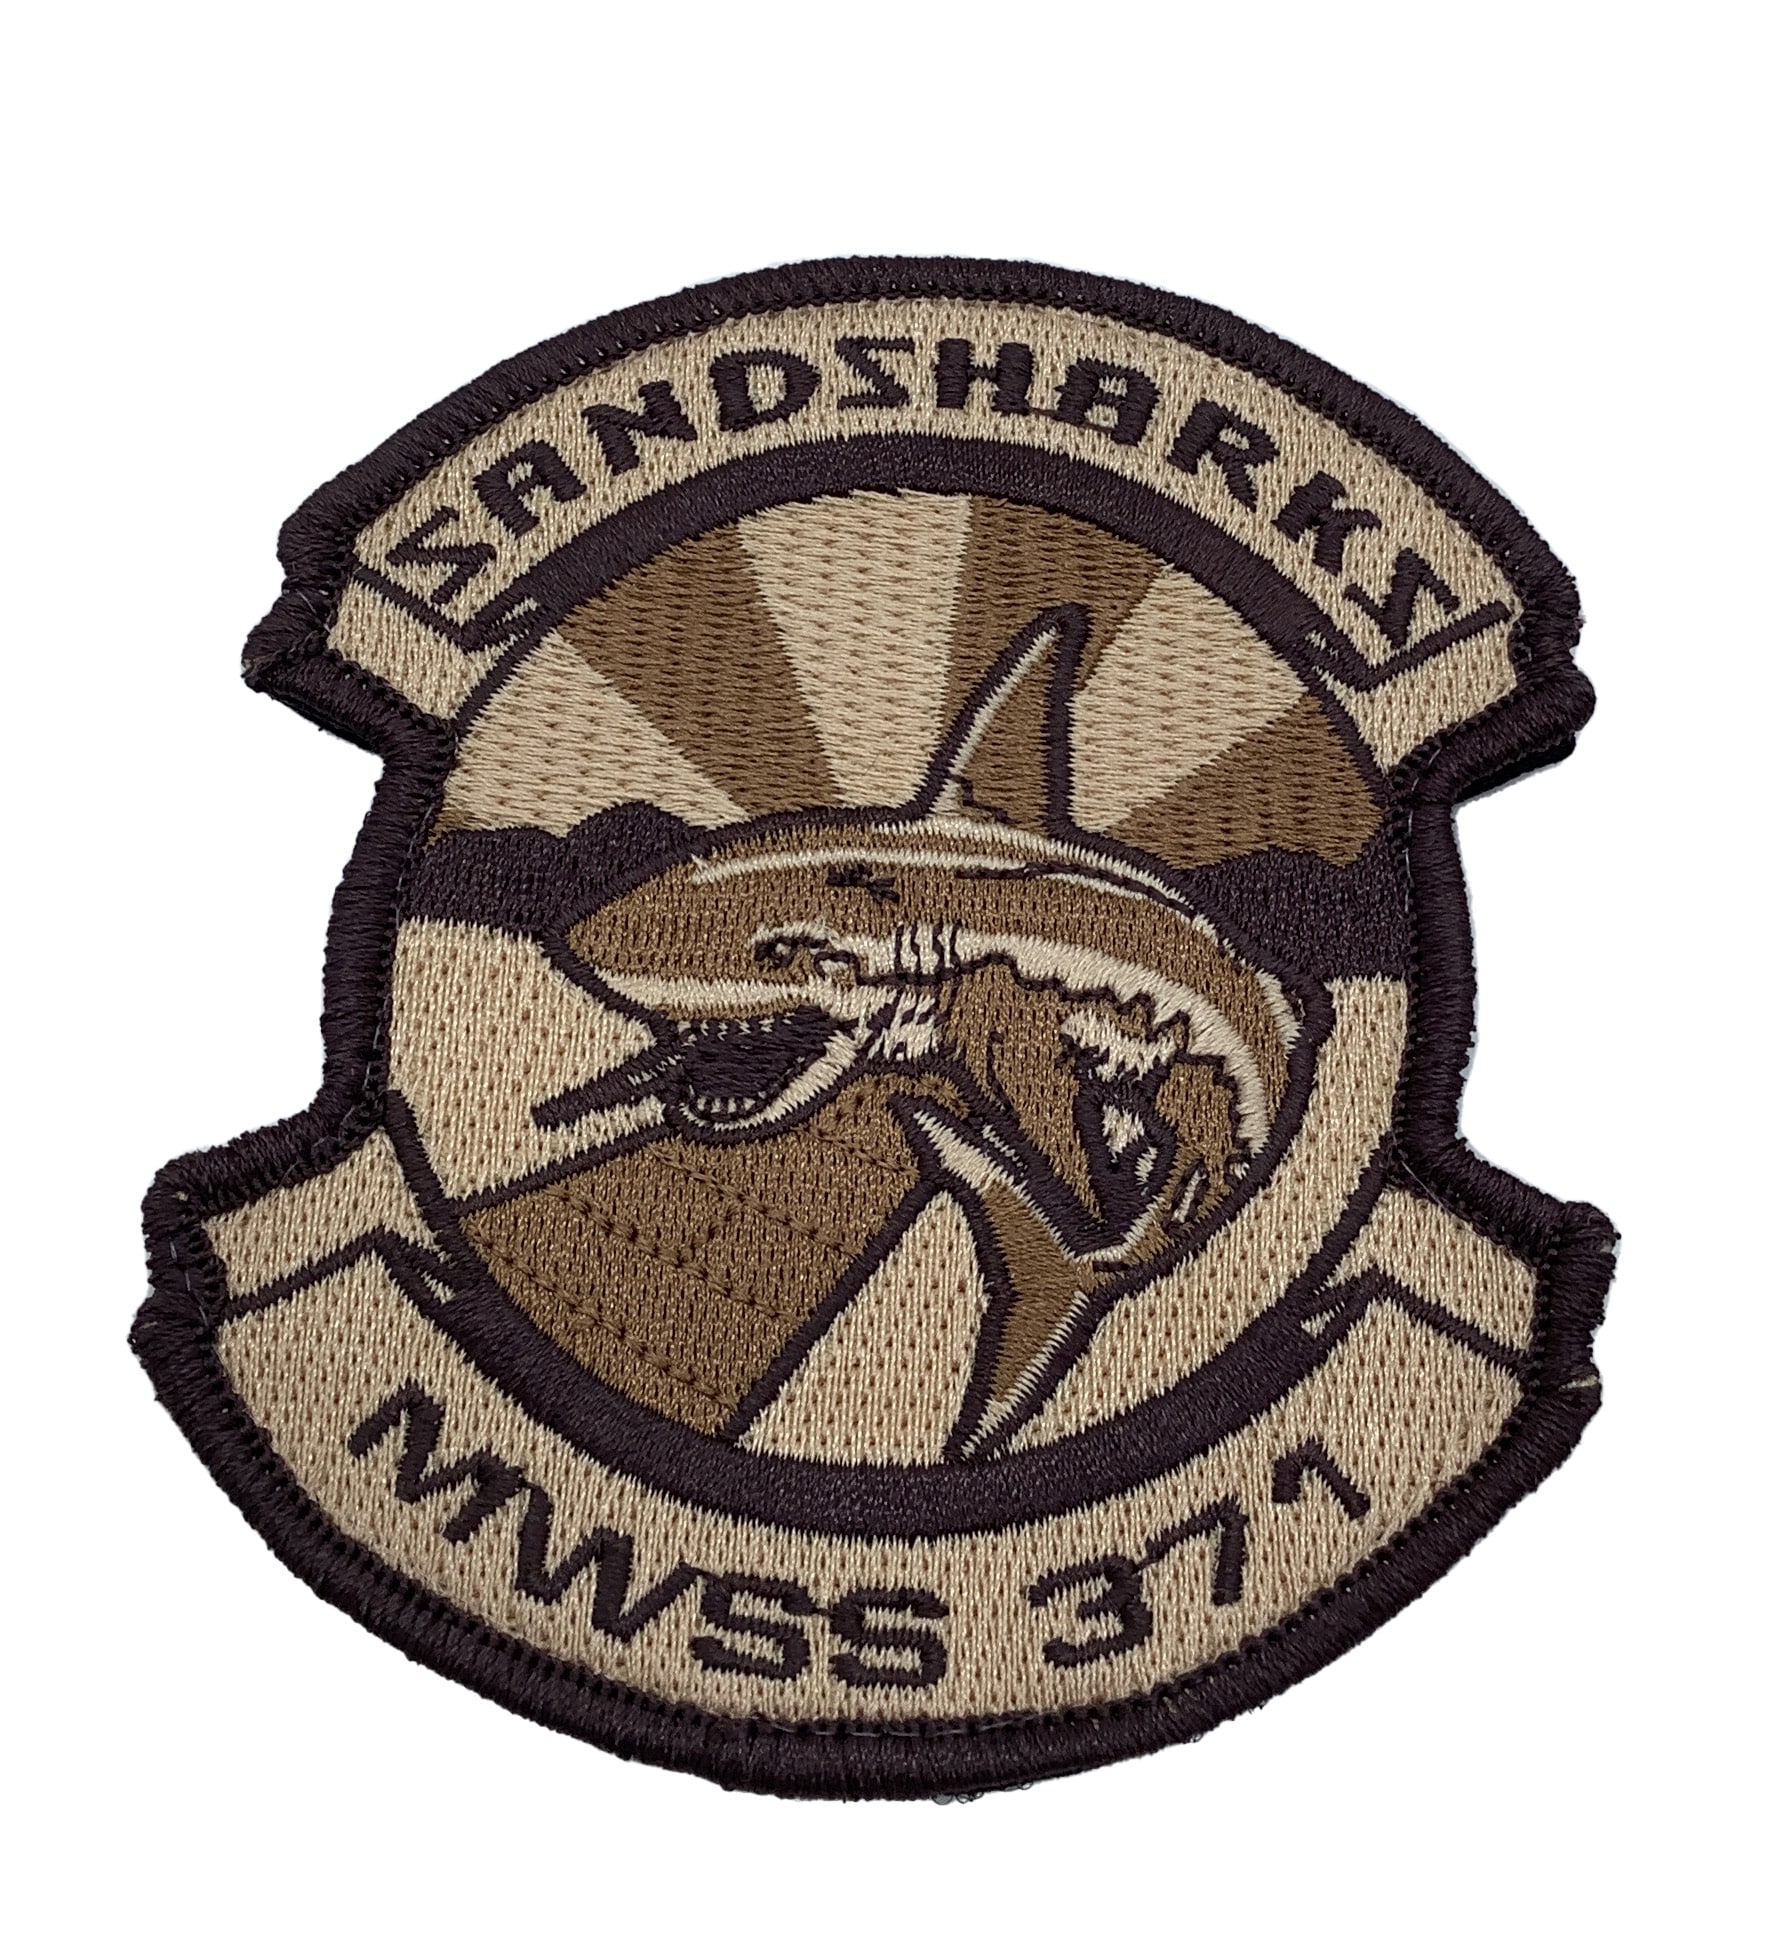 MWSS-371 Sandsharks (Tan) Patch – With Hook and Loop - Squadron